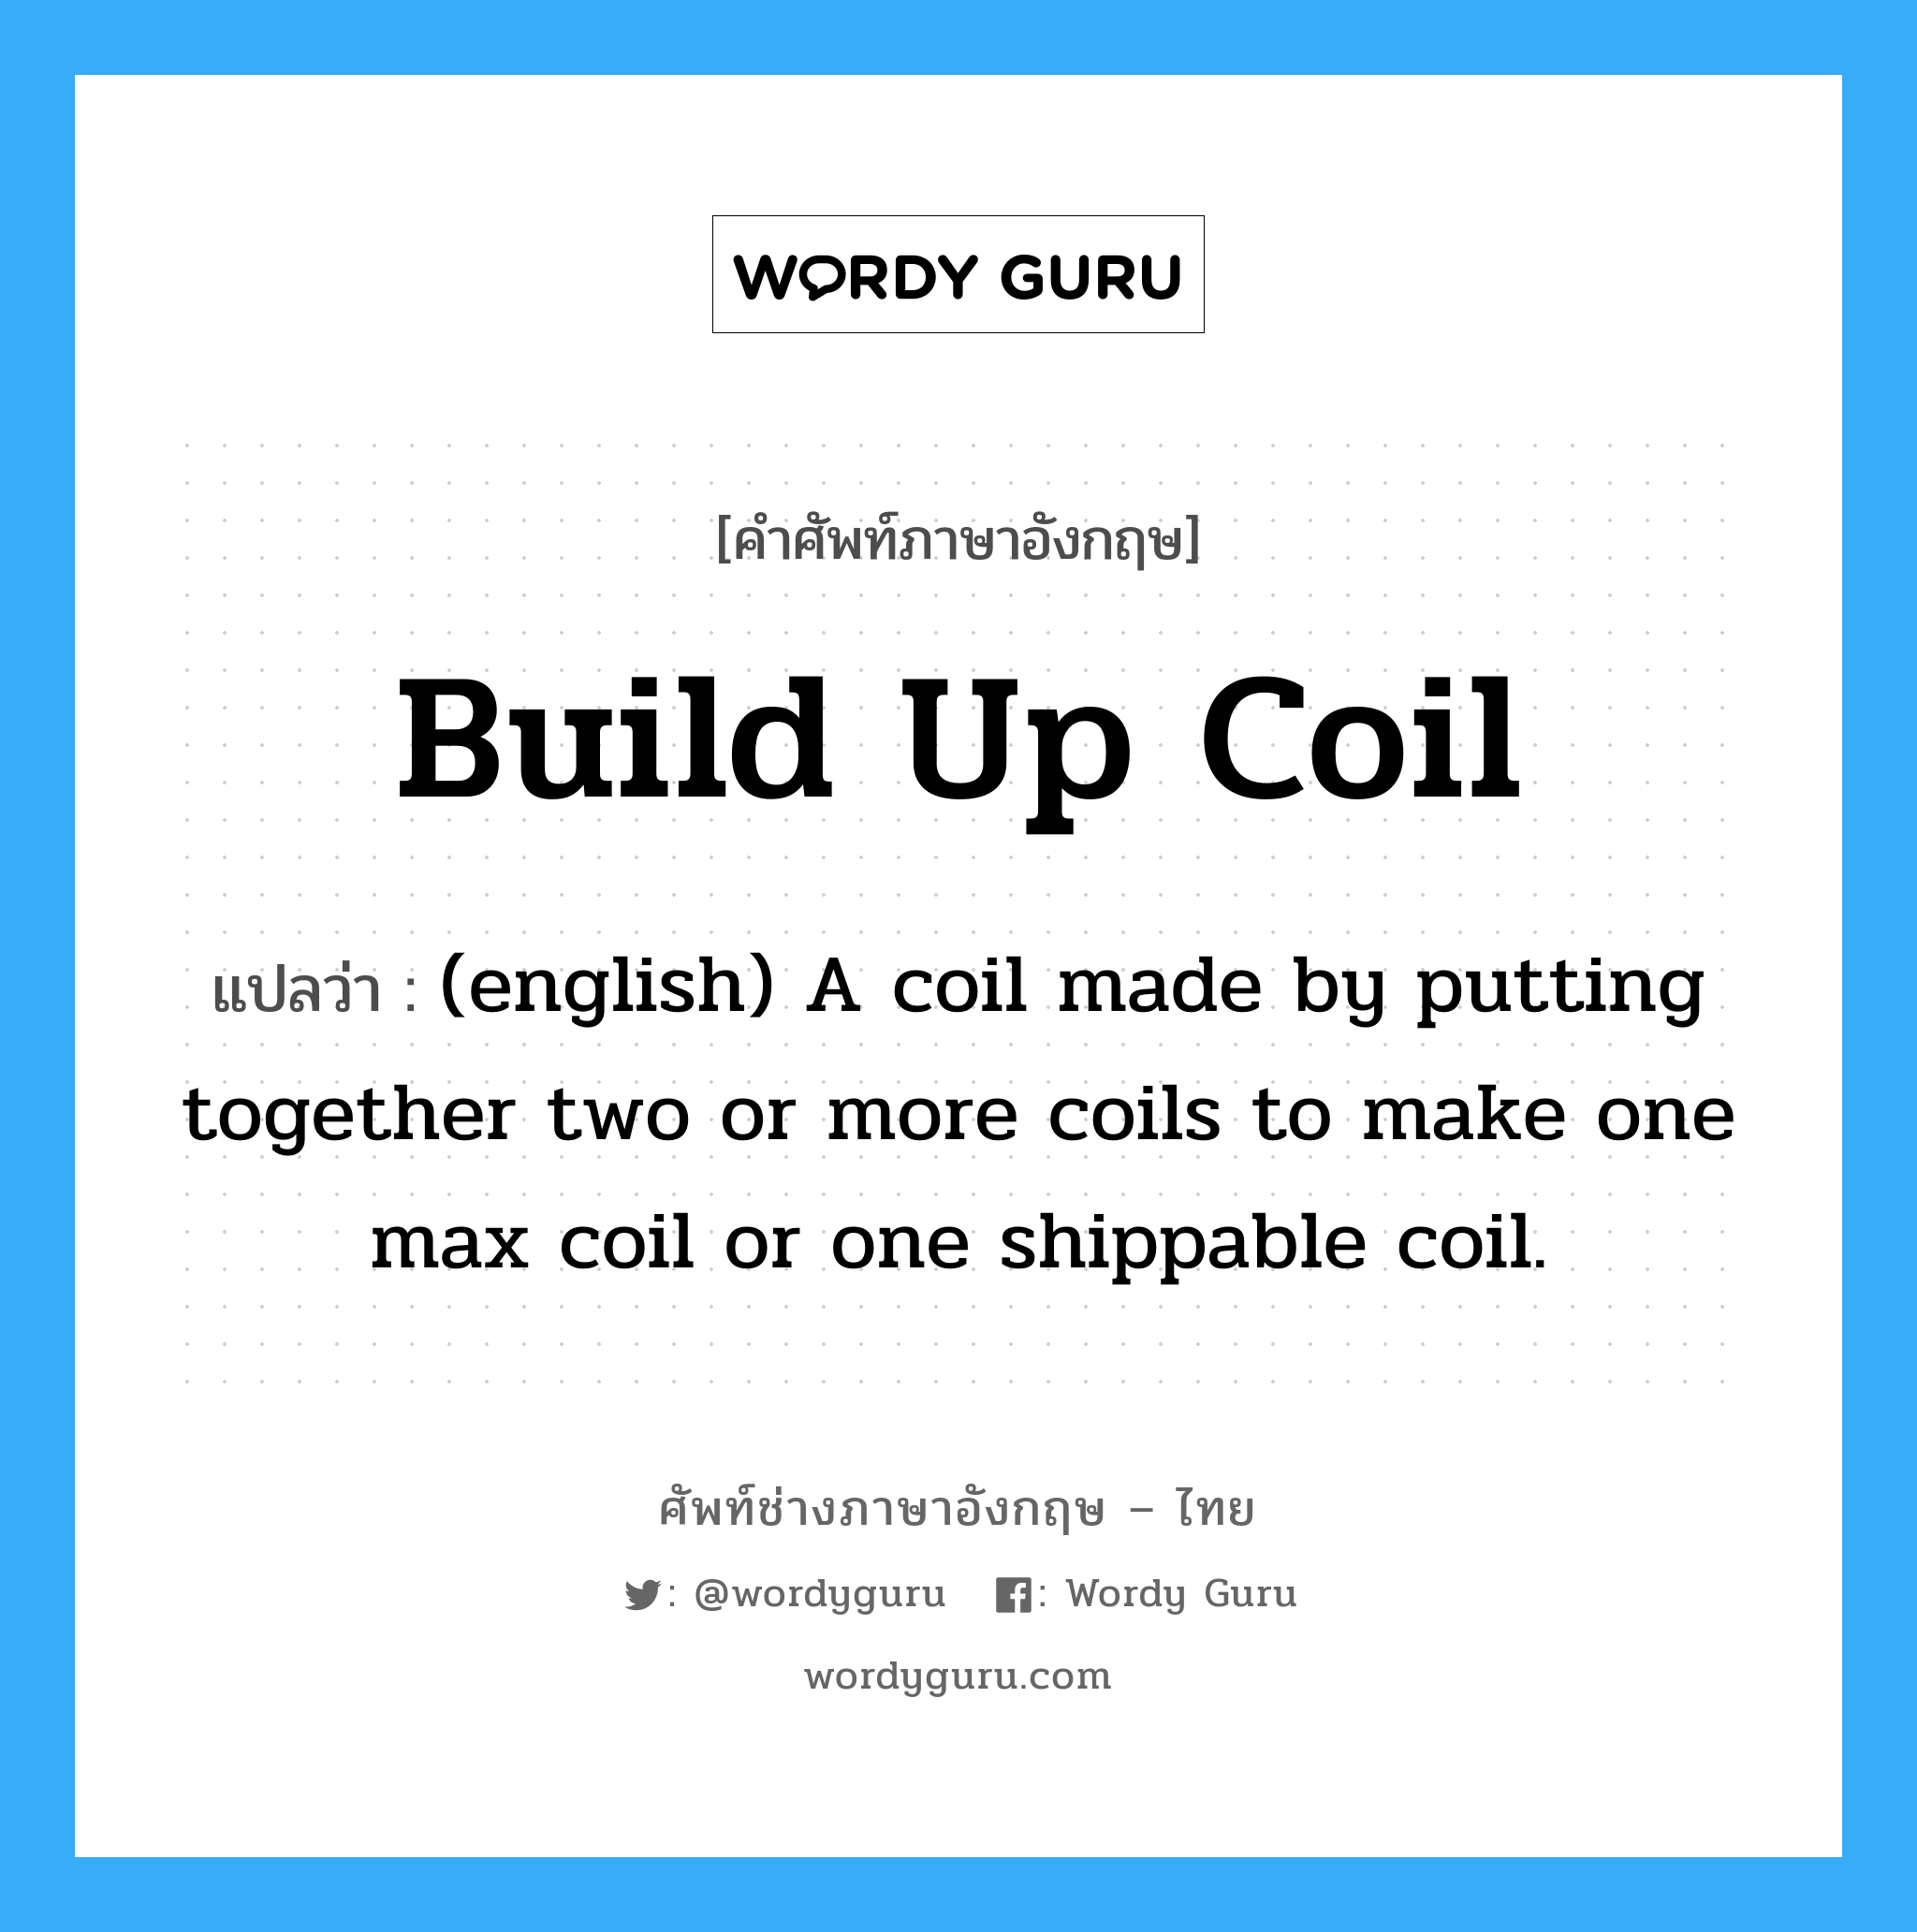 (english) A coil made by putting together two or more coils to make one max coil or one shippable coil. ภาษาอังกฤษ?, คำศัพท์ช่างภาษาอังกฤษ - ไทย (english) A coil made by putting together two or more coils to make one max coil or one shippable coil. คำศัพท์ภาษาอังกฤษ (english) A coil made by putting together two or more coils to make one max coil or one shippable coil. แปลว่า Build Up Coil